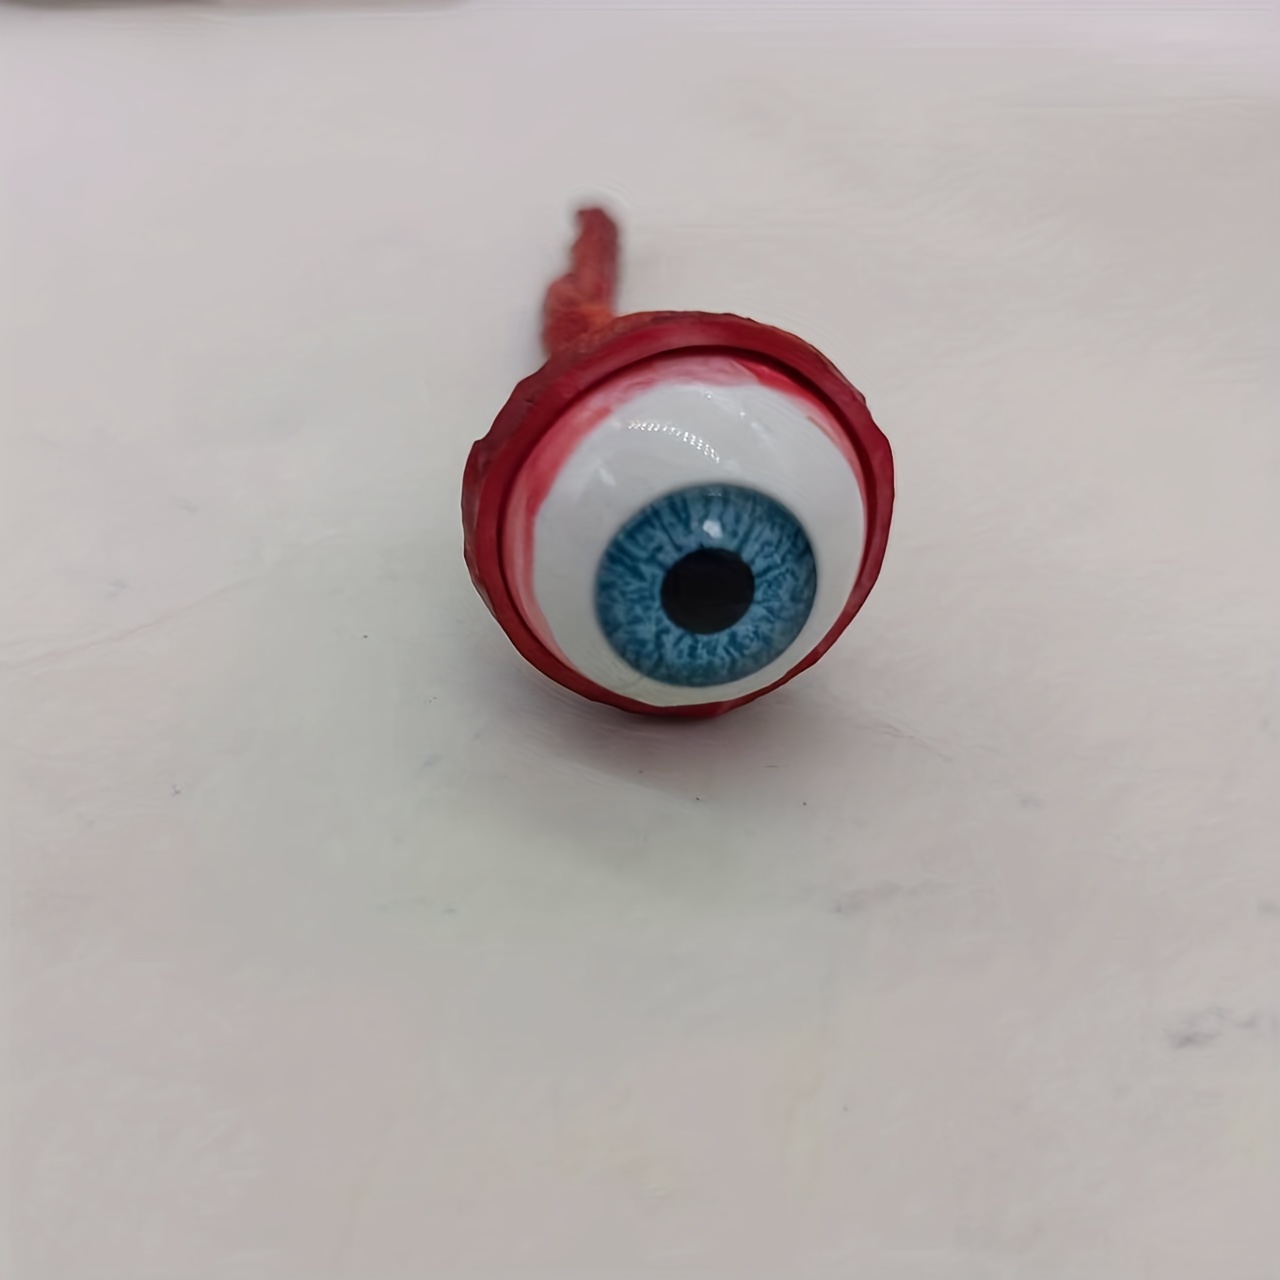 Half Round Eyeballs - Realistic Acrylic Fake Eyes For Halloween Props,  Dolls Crafts, Cosplay, And Party Decoration Compatible With The Tpe And  Silicone Doll's Eyes - Temu Malaysia